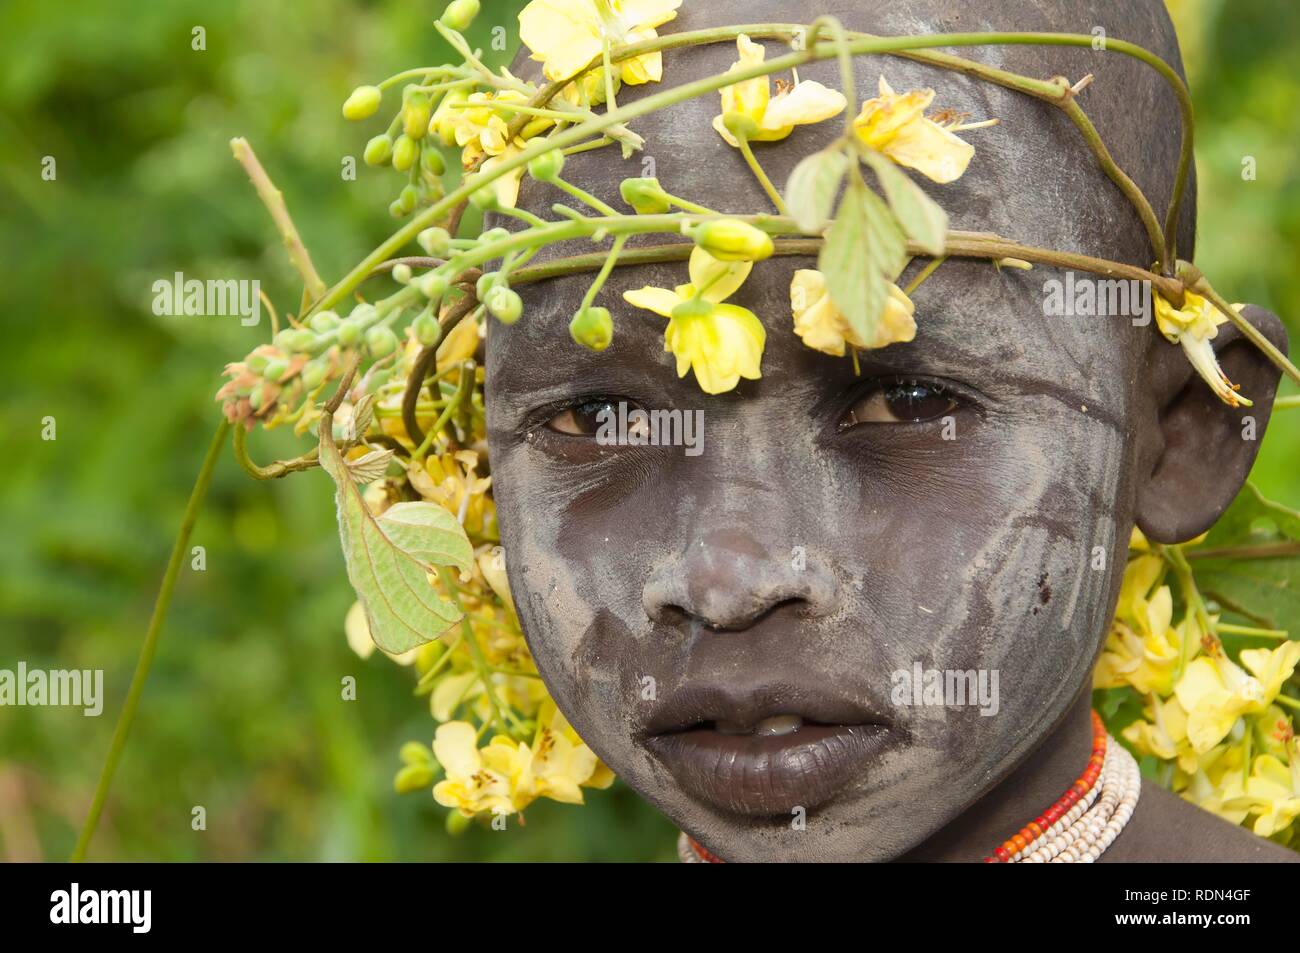 Surma child with facial painting, Tulgit, Omo River Valley, Ethiopia, Africa Stock Photo